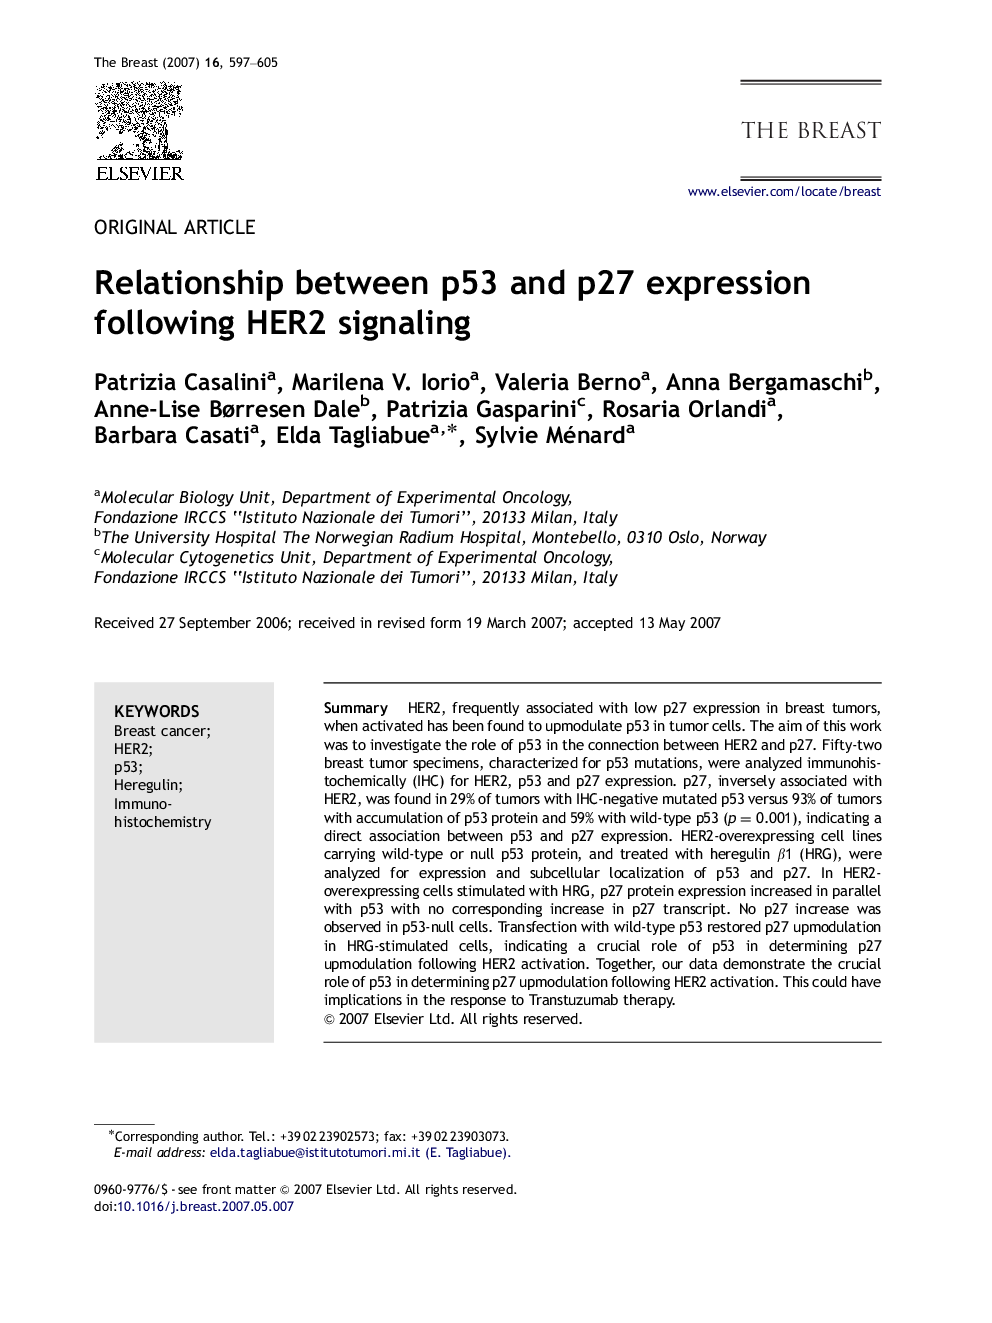 Relationship between p53 and p27 expression following HER2 signaling